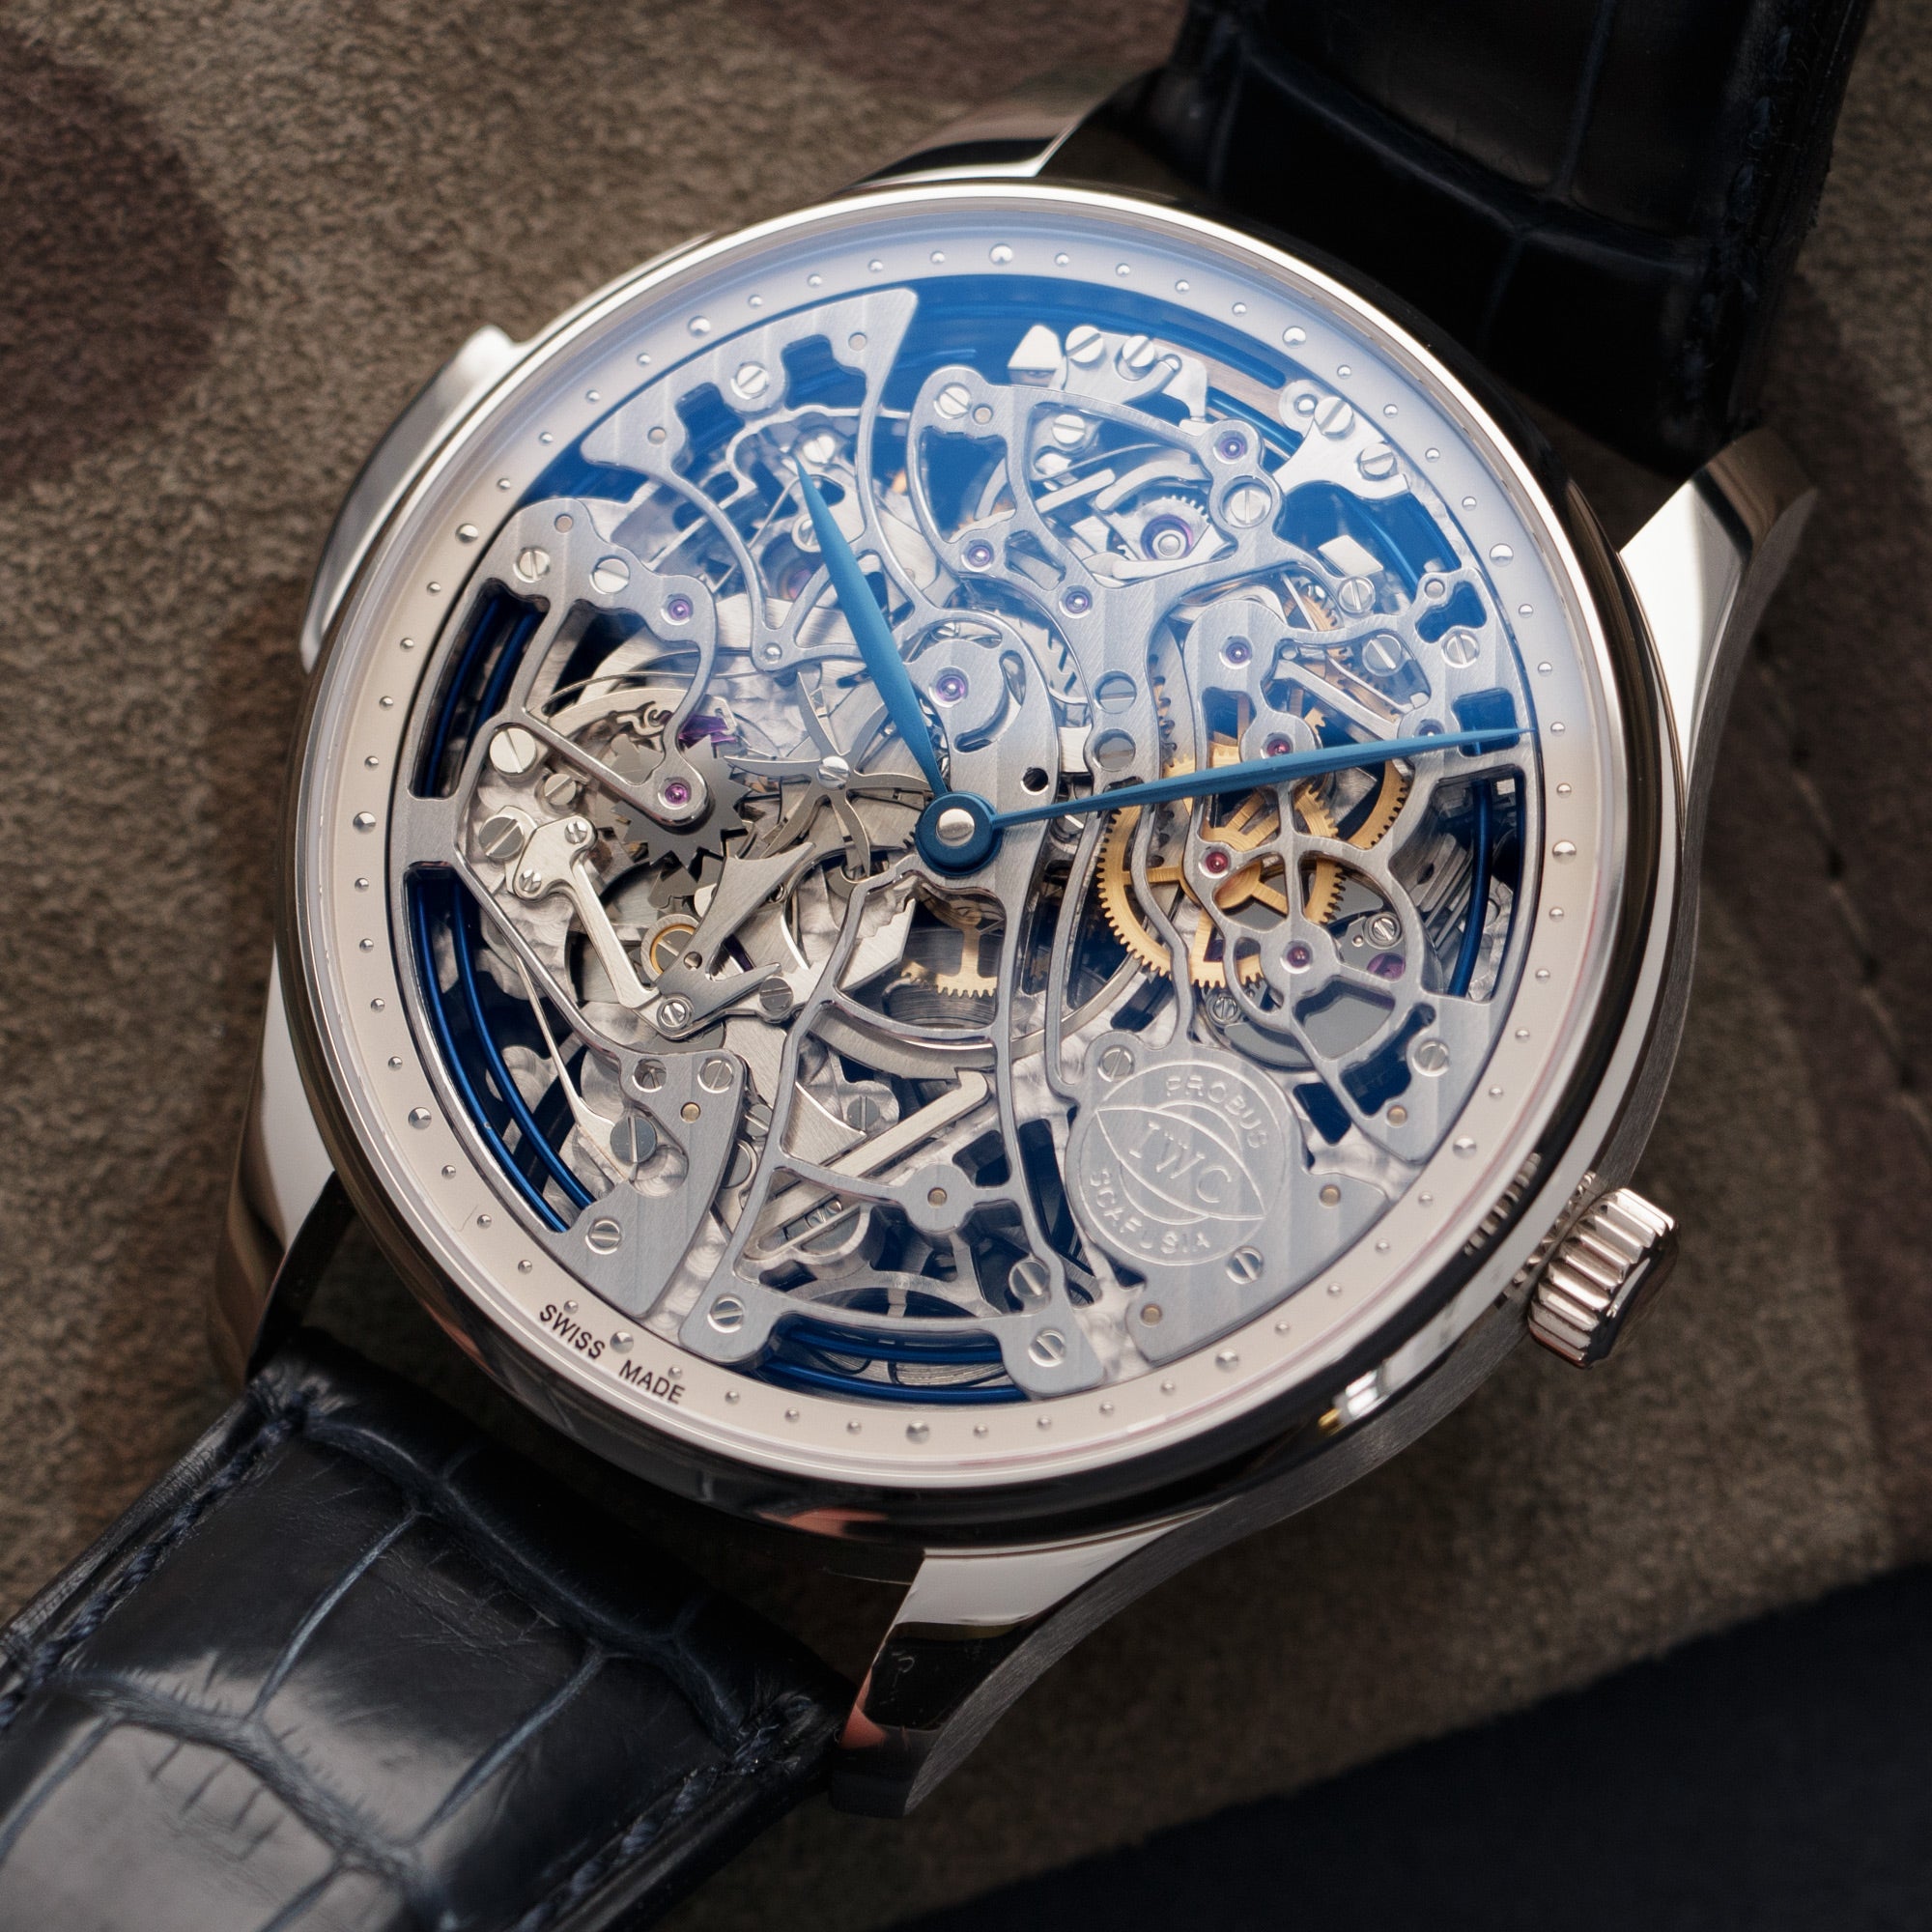 IWC - IWC Platinum Portuguese Skeletonizsed Minute Repeater Watch - The Keystone Watches